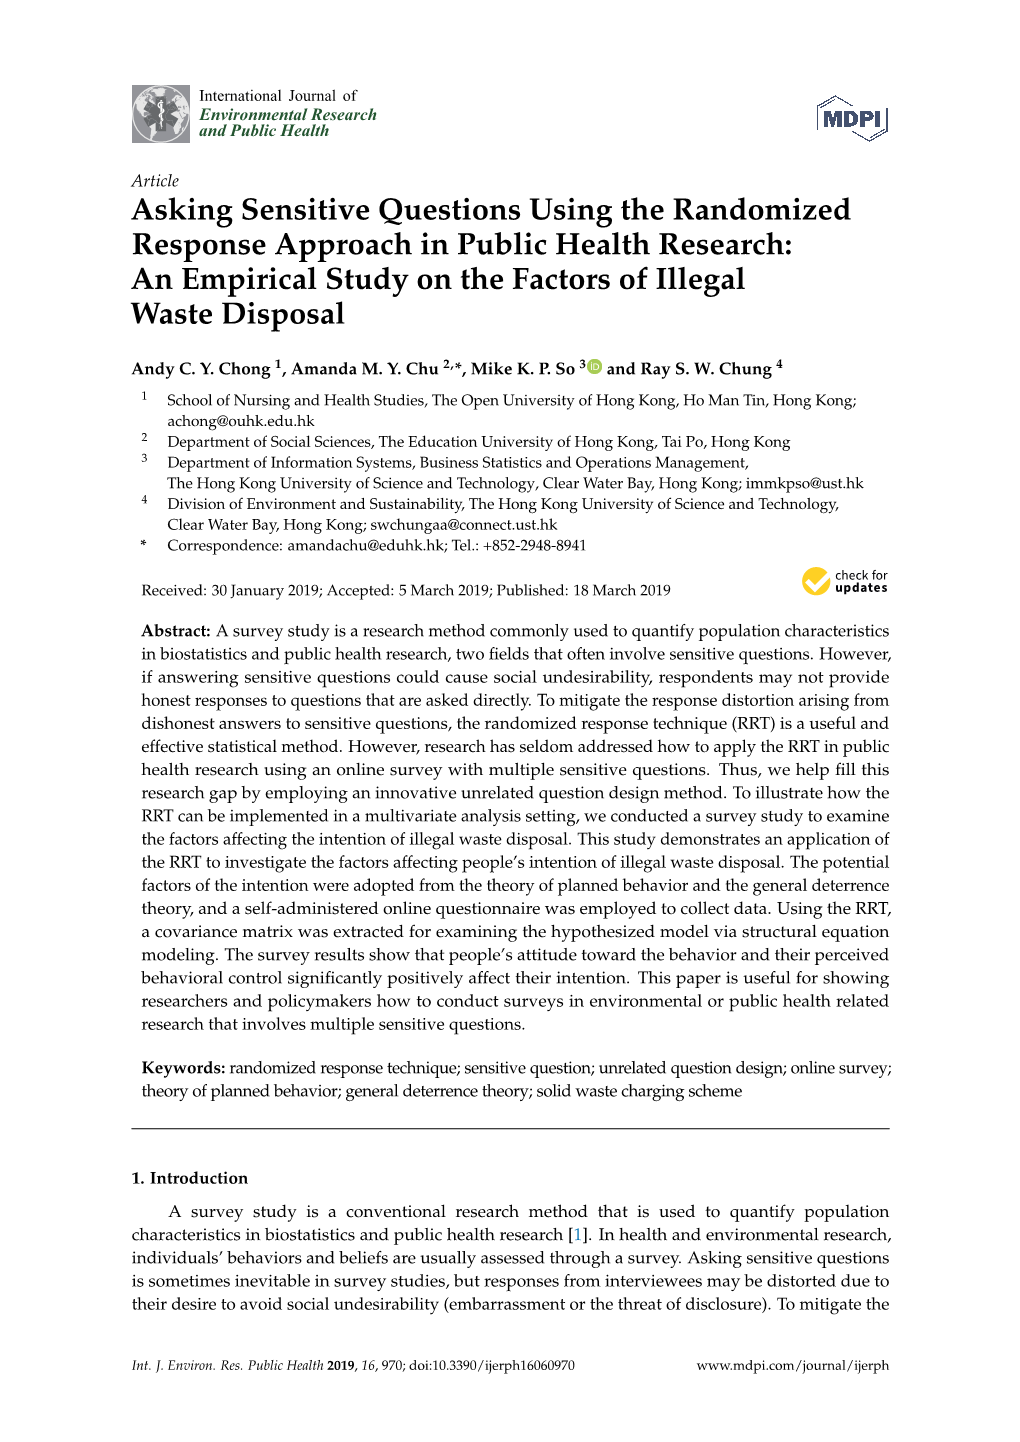 Asking Sensitive Questions Using the Randomized Response Approach in Public Health Research: an Empirical Study on the Factors of Illegal Waste Disposal